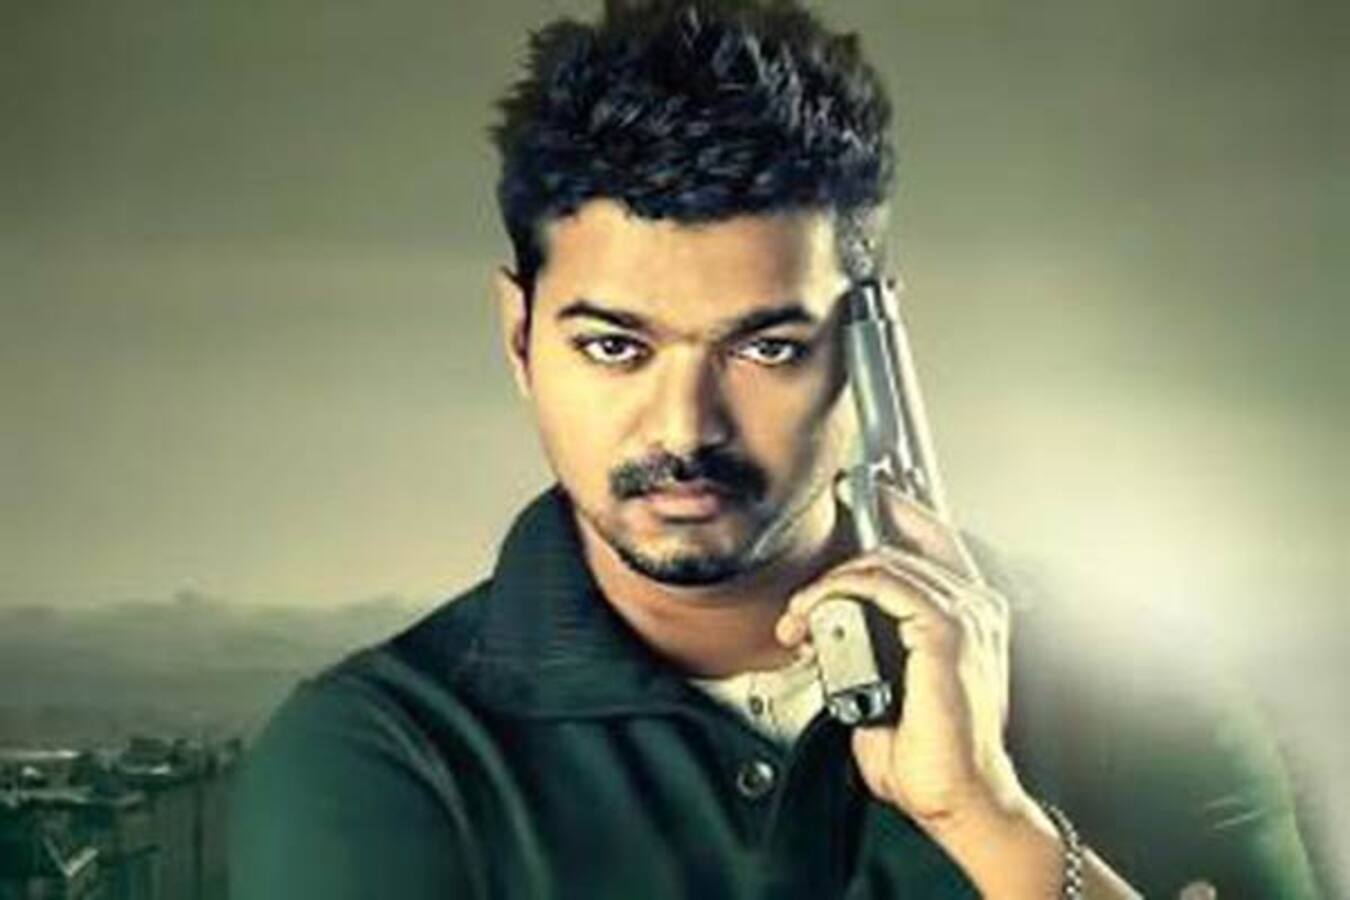 Vijay will faint if he comes to know what his popular Kaththi song means in Romanian!